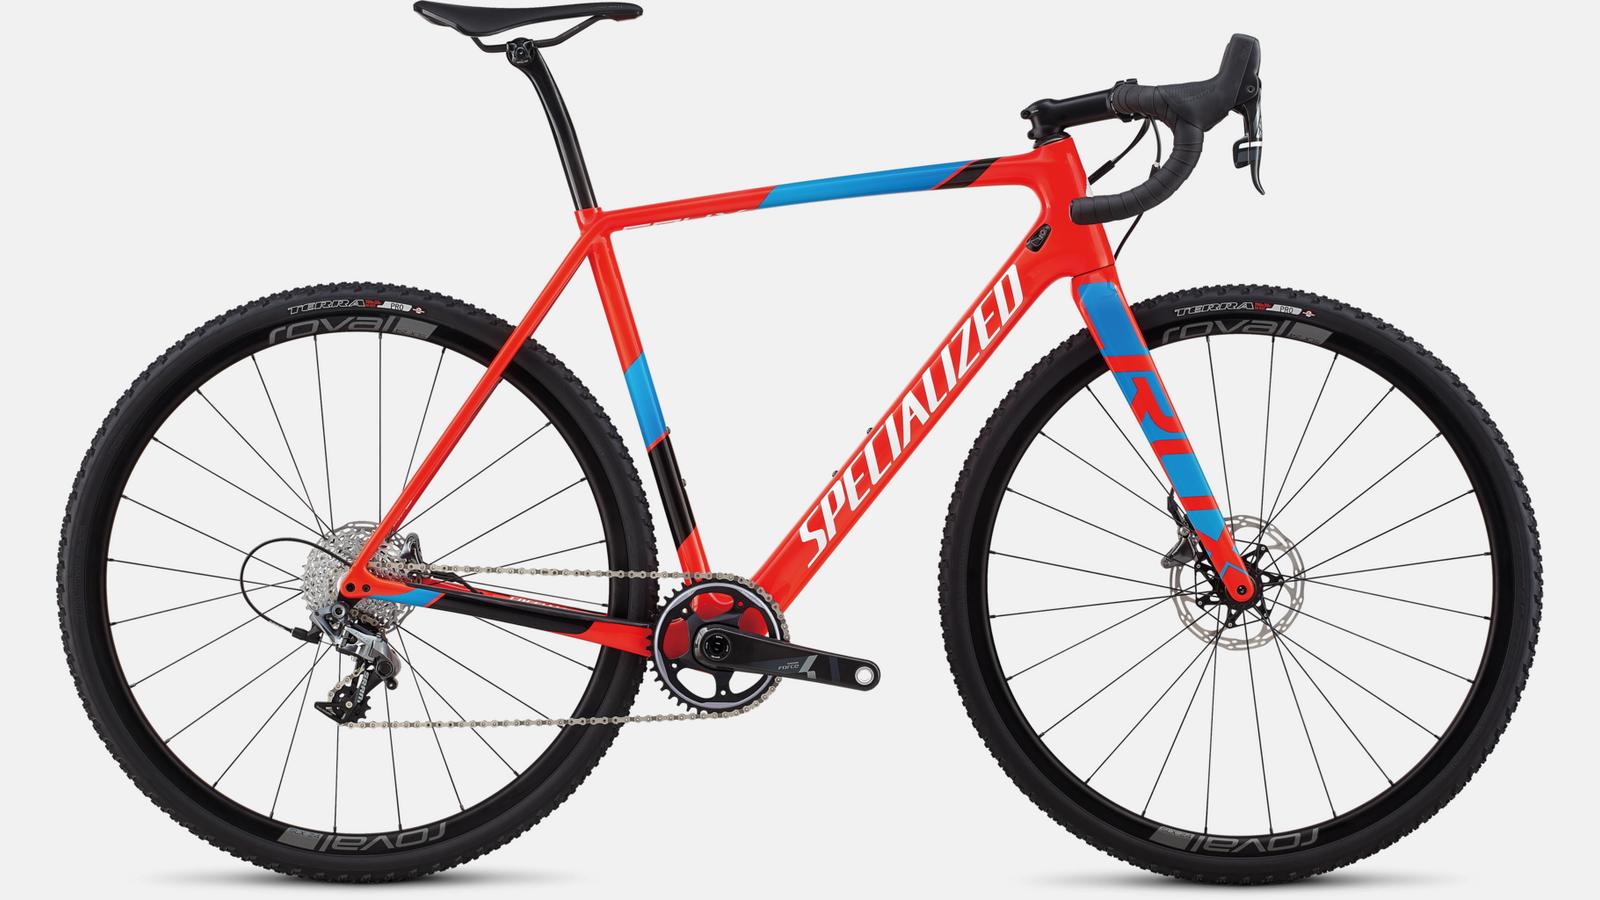 Paint for 2018 Specialized CruX Expert X1 - Gloss Rocket Red